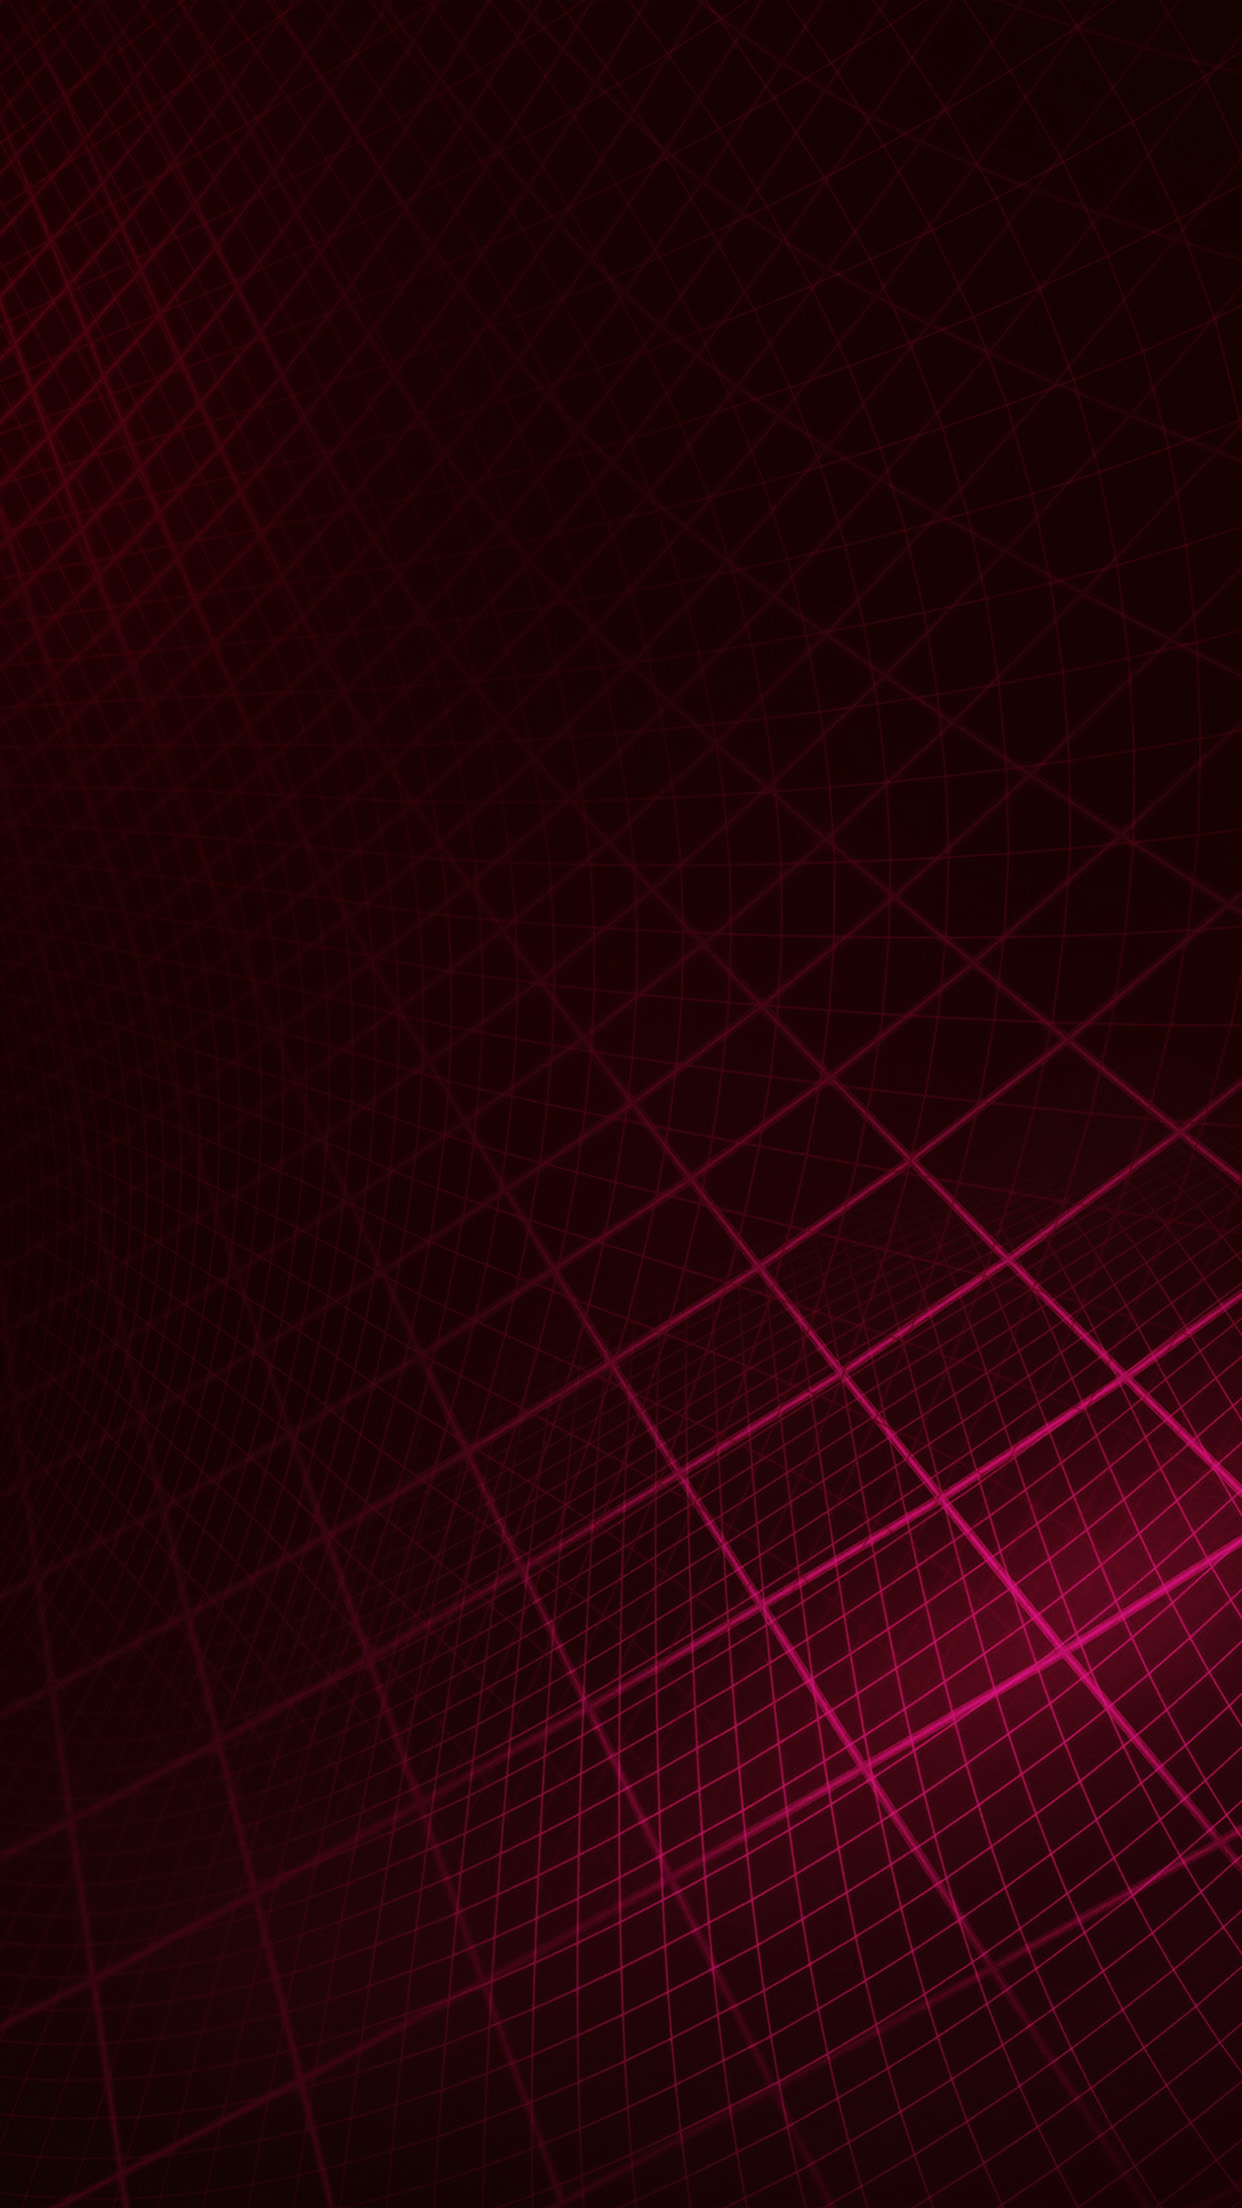 Iphone X Wallpapers Hd Abstract Red - HD Wallpaper 